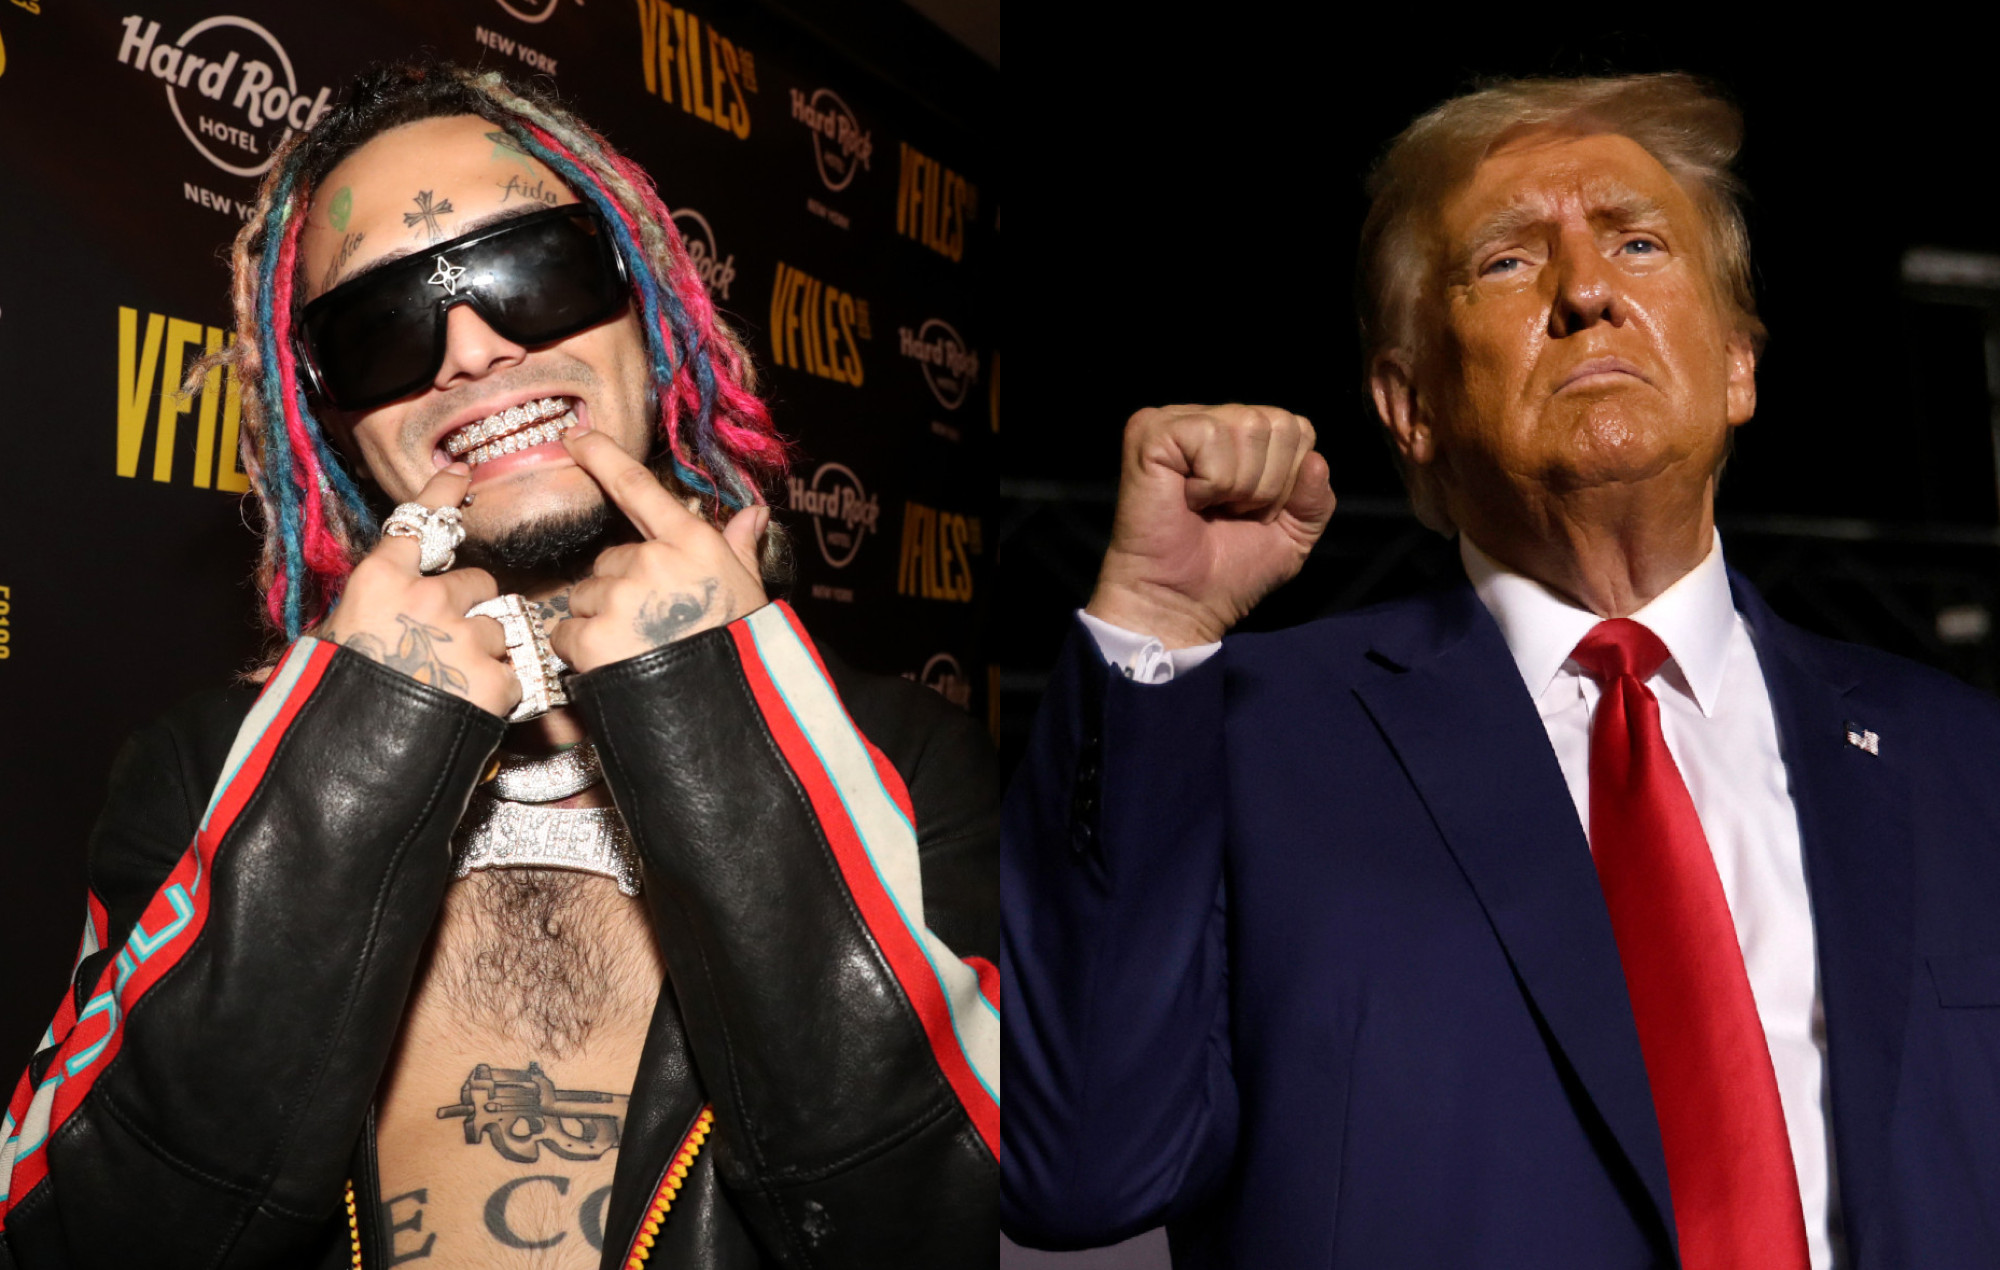 Donald Trump shouts out Lil Pump at a campaign rally in Florida